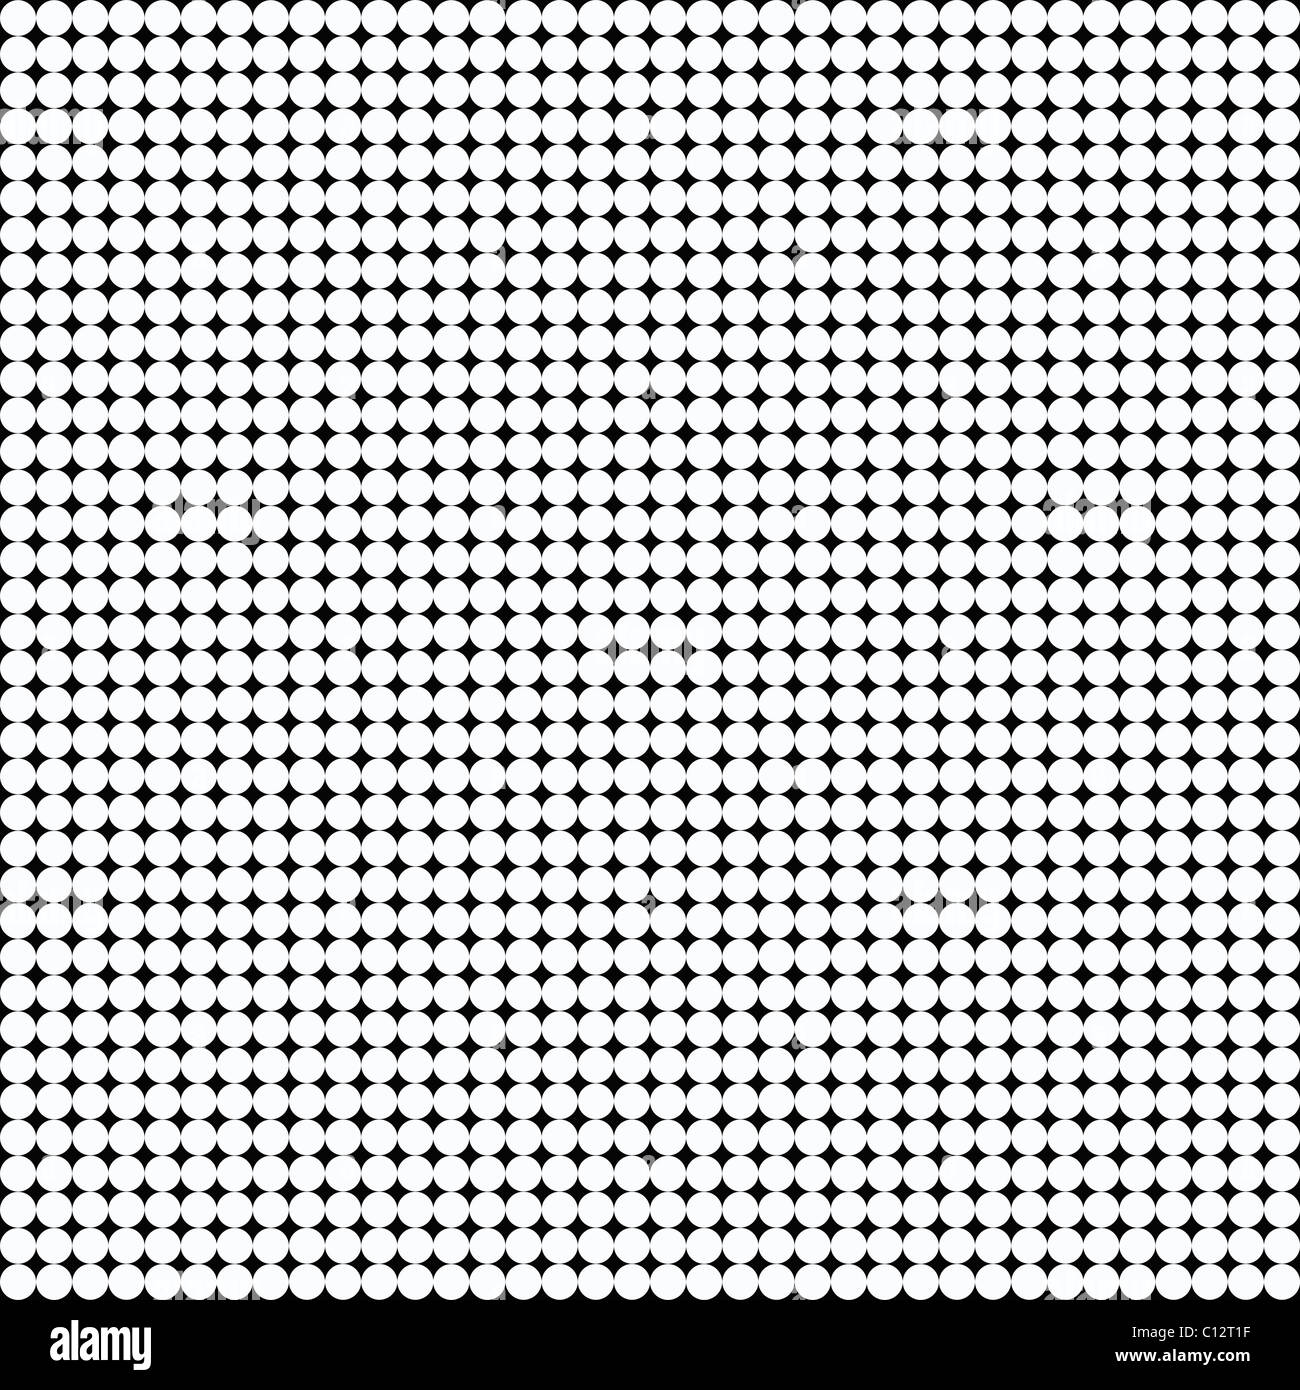 Seamless pattern background of black and white Stock Photo